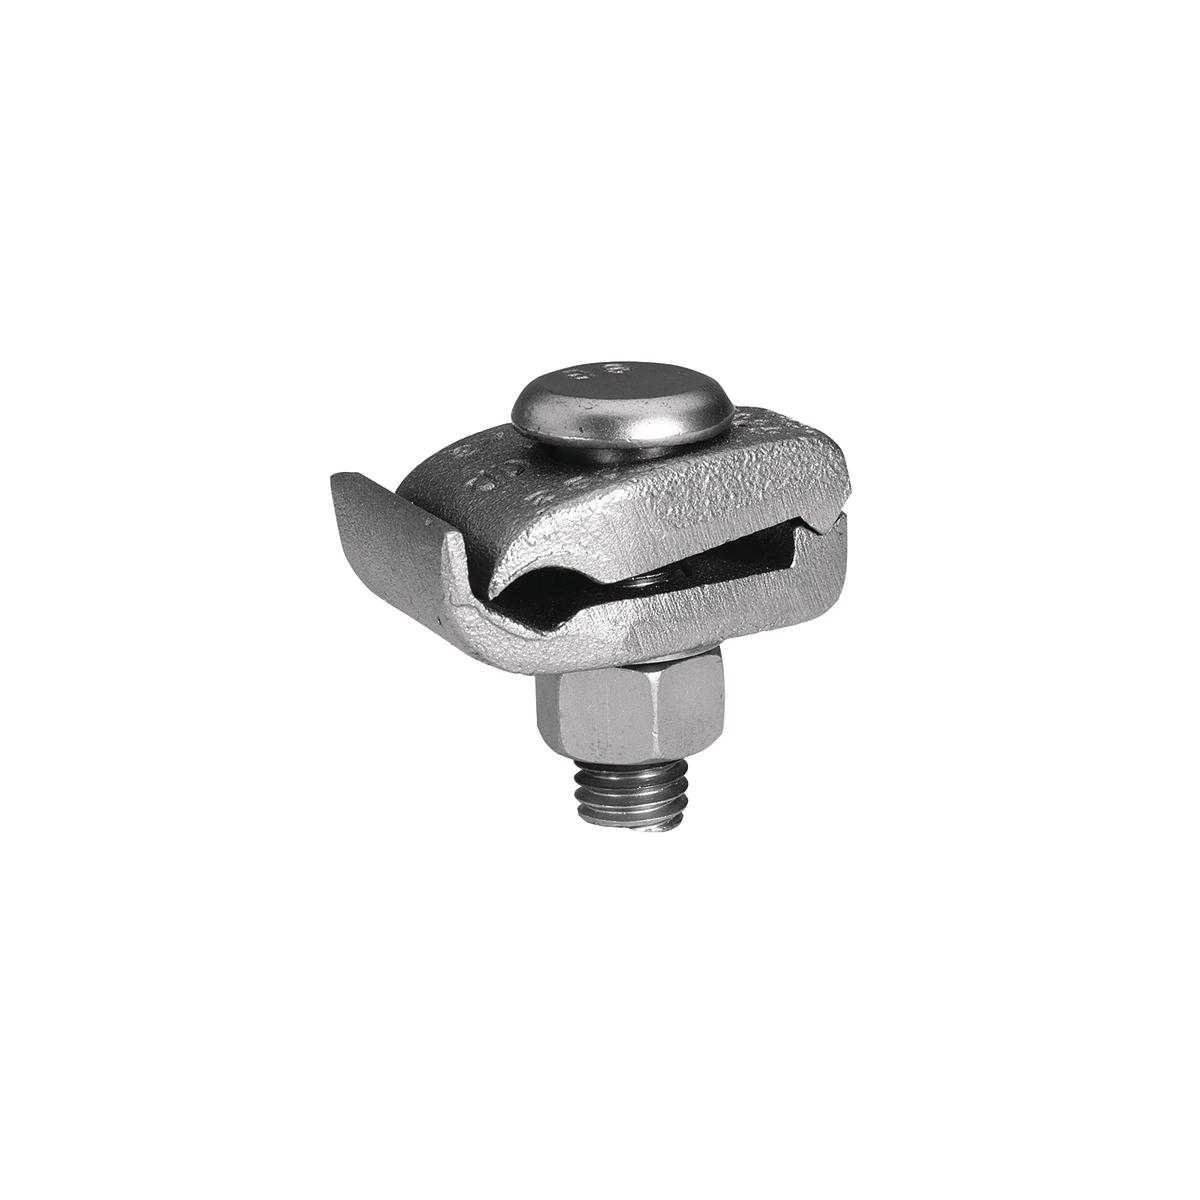 Hubbell GB26T4GSTN Mechanical Grounding Connector, Cable to 1/2" Thick Bar, 4 AWG (Sol)-2/0 AWG (Str), Hardware: Galvanized Steel, Tin Plated. 